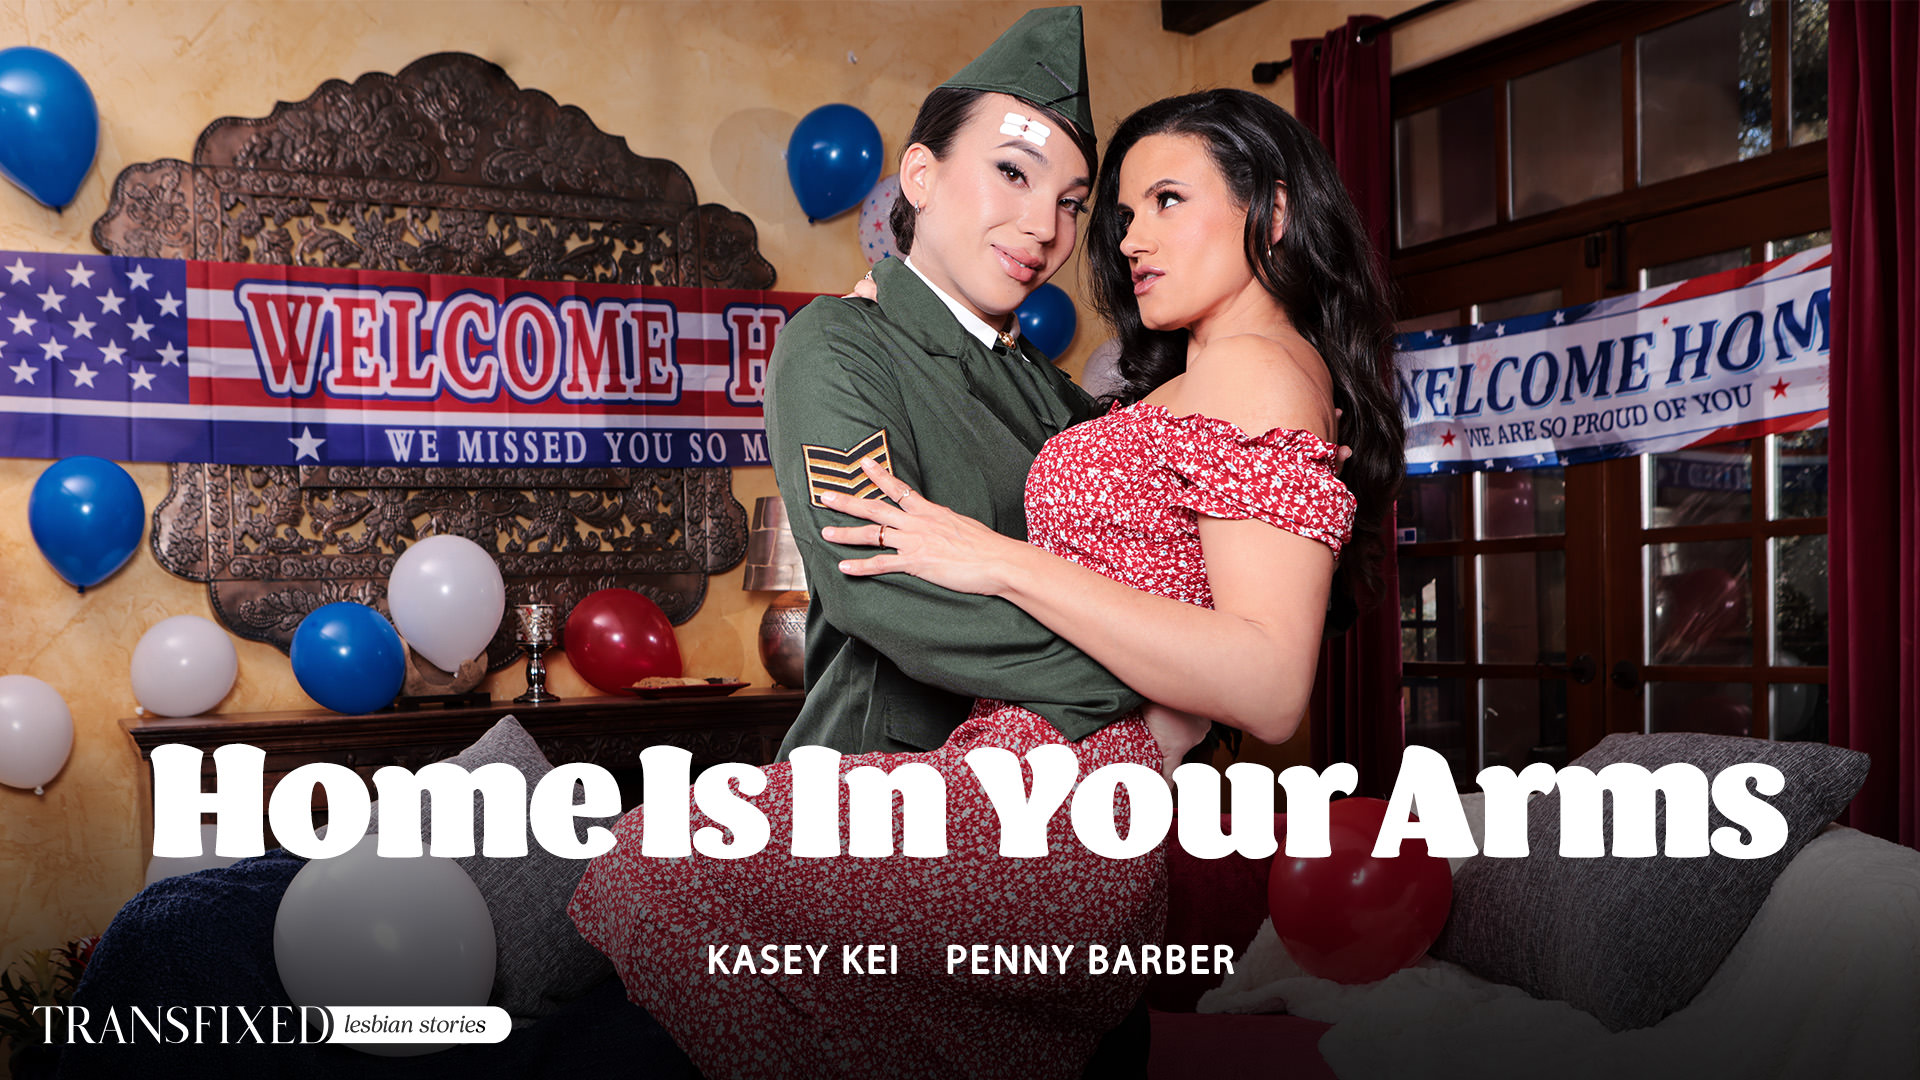 Kasey Kei, Penny Barber “Home Is In Your Arms” Transfixed